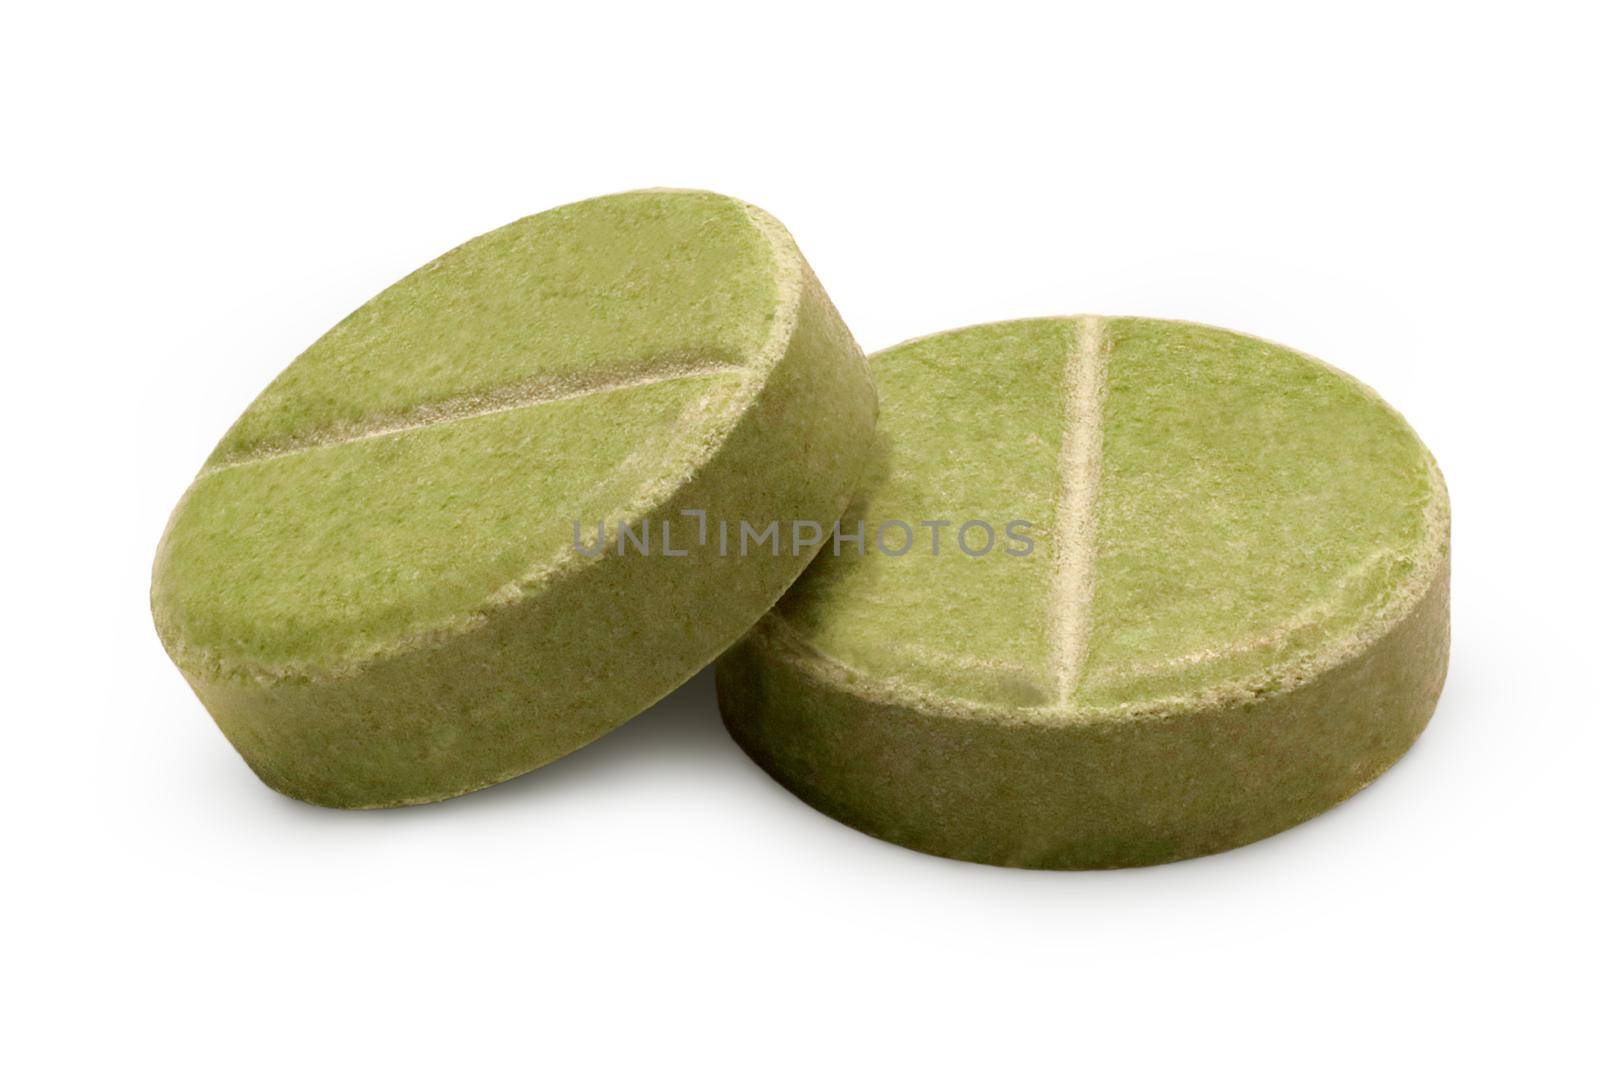 Two green herbal pills isolated on white background. Close-up macro view